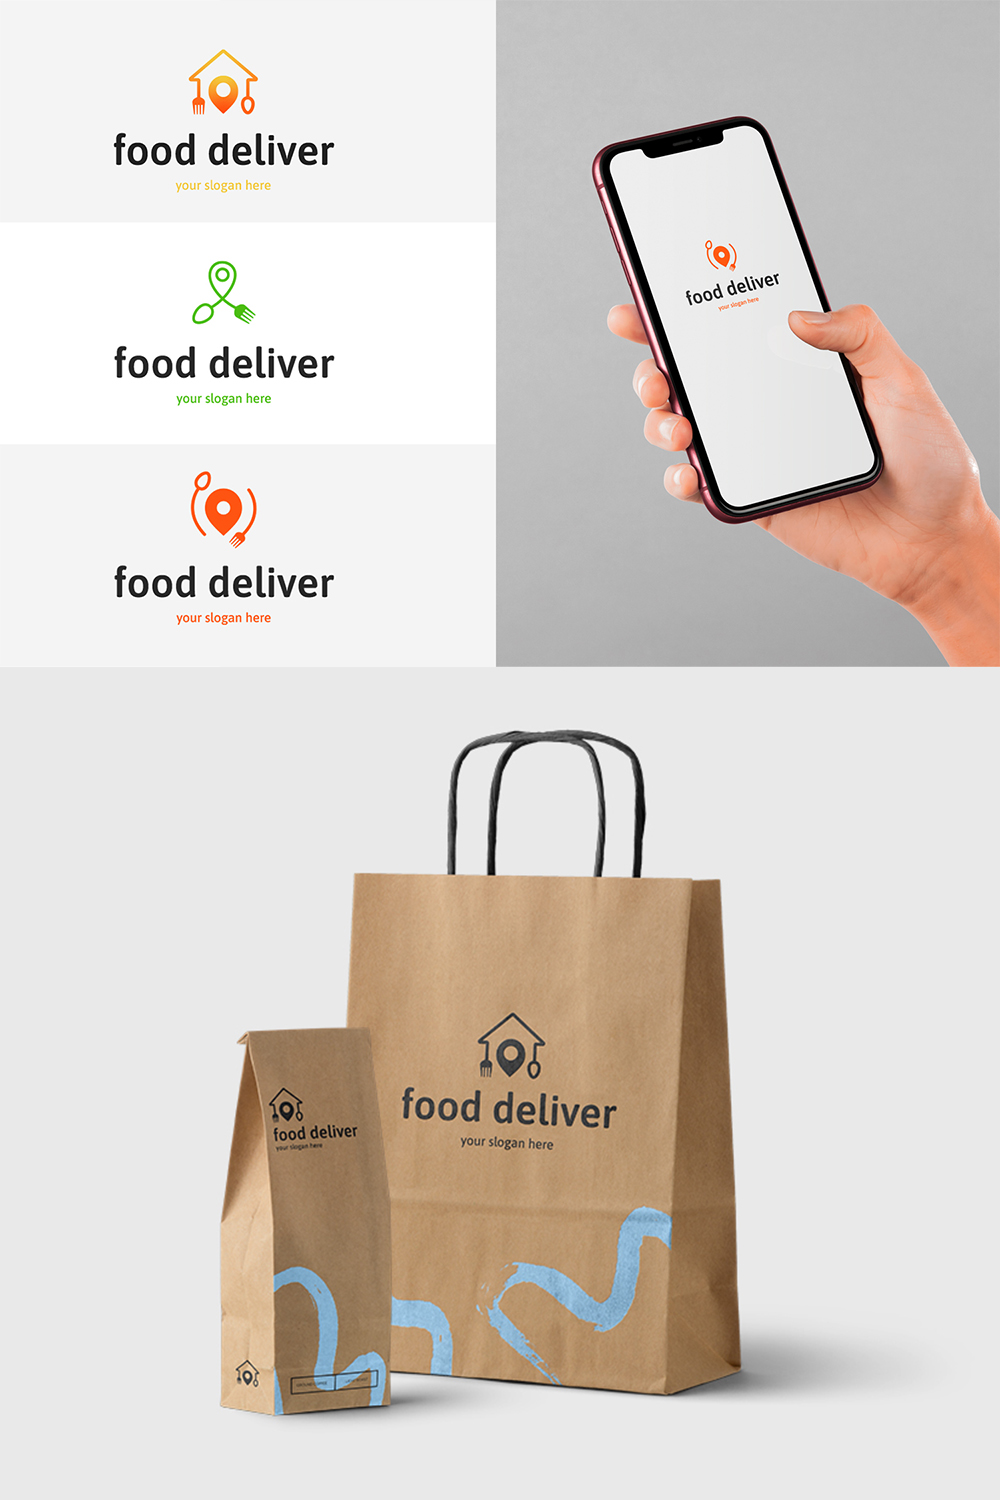 3 Food Delivery Logos Pinterest Image.